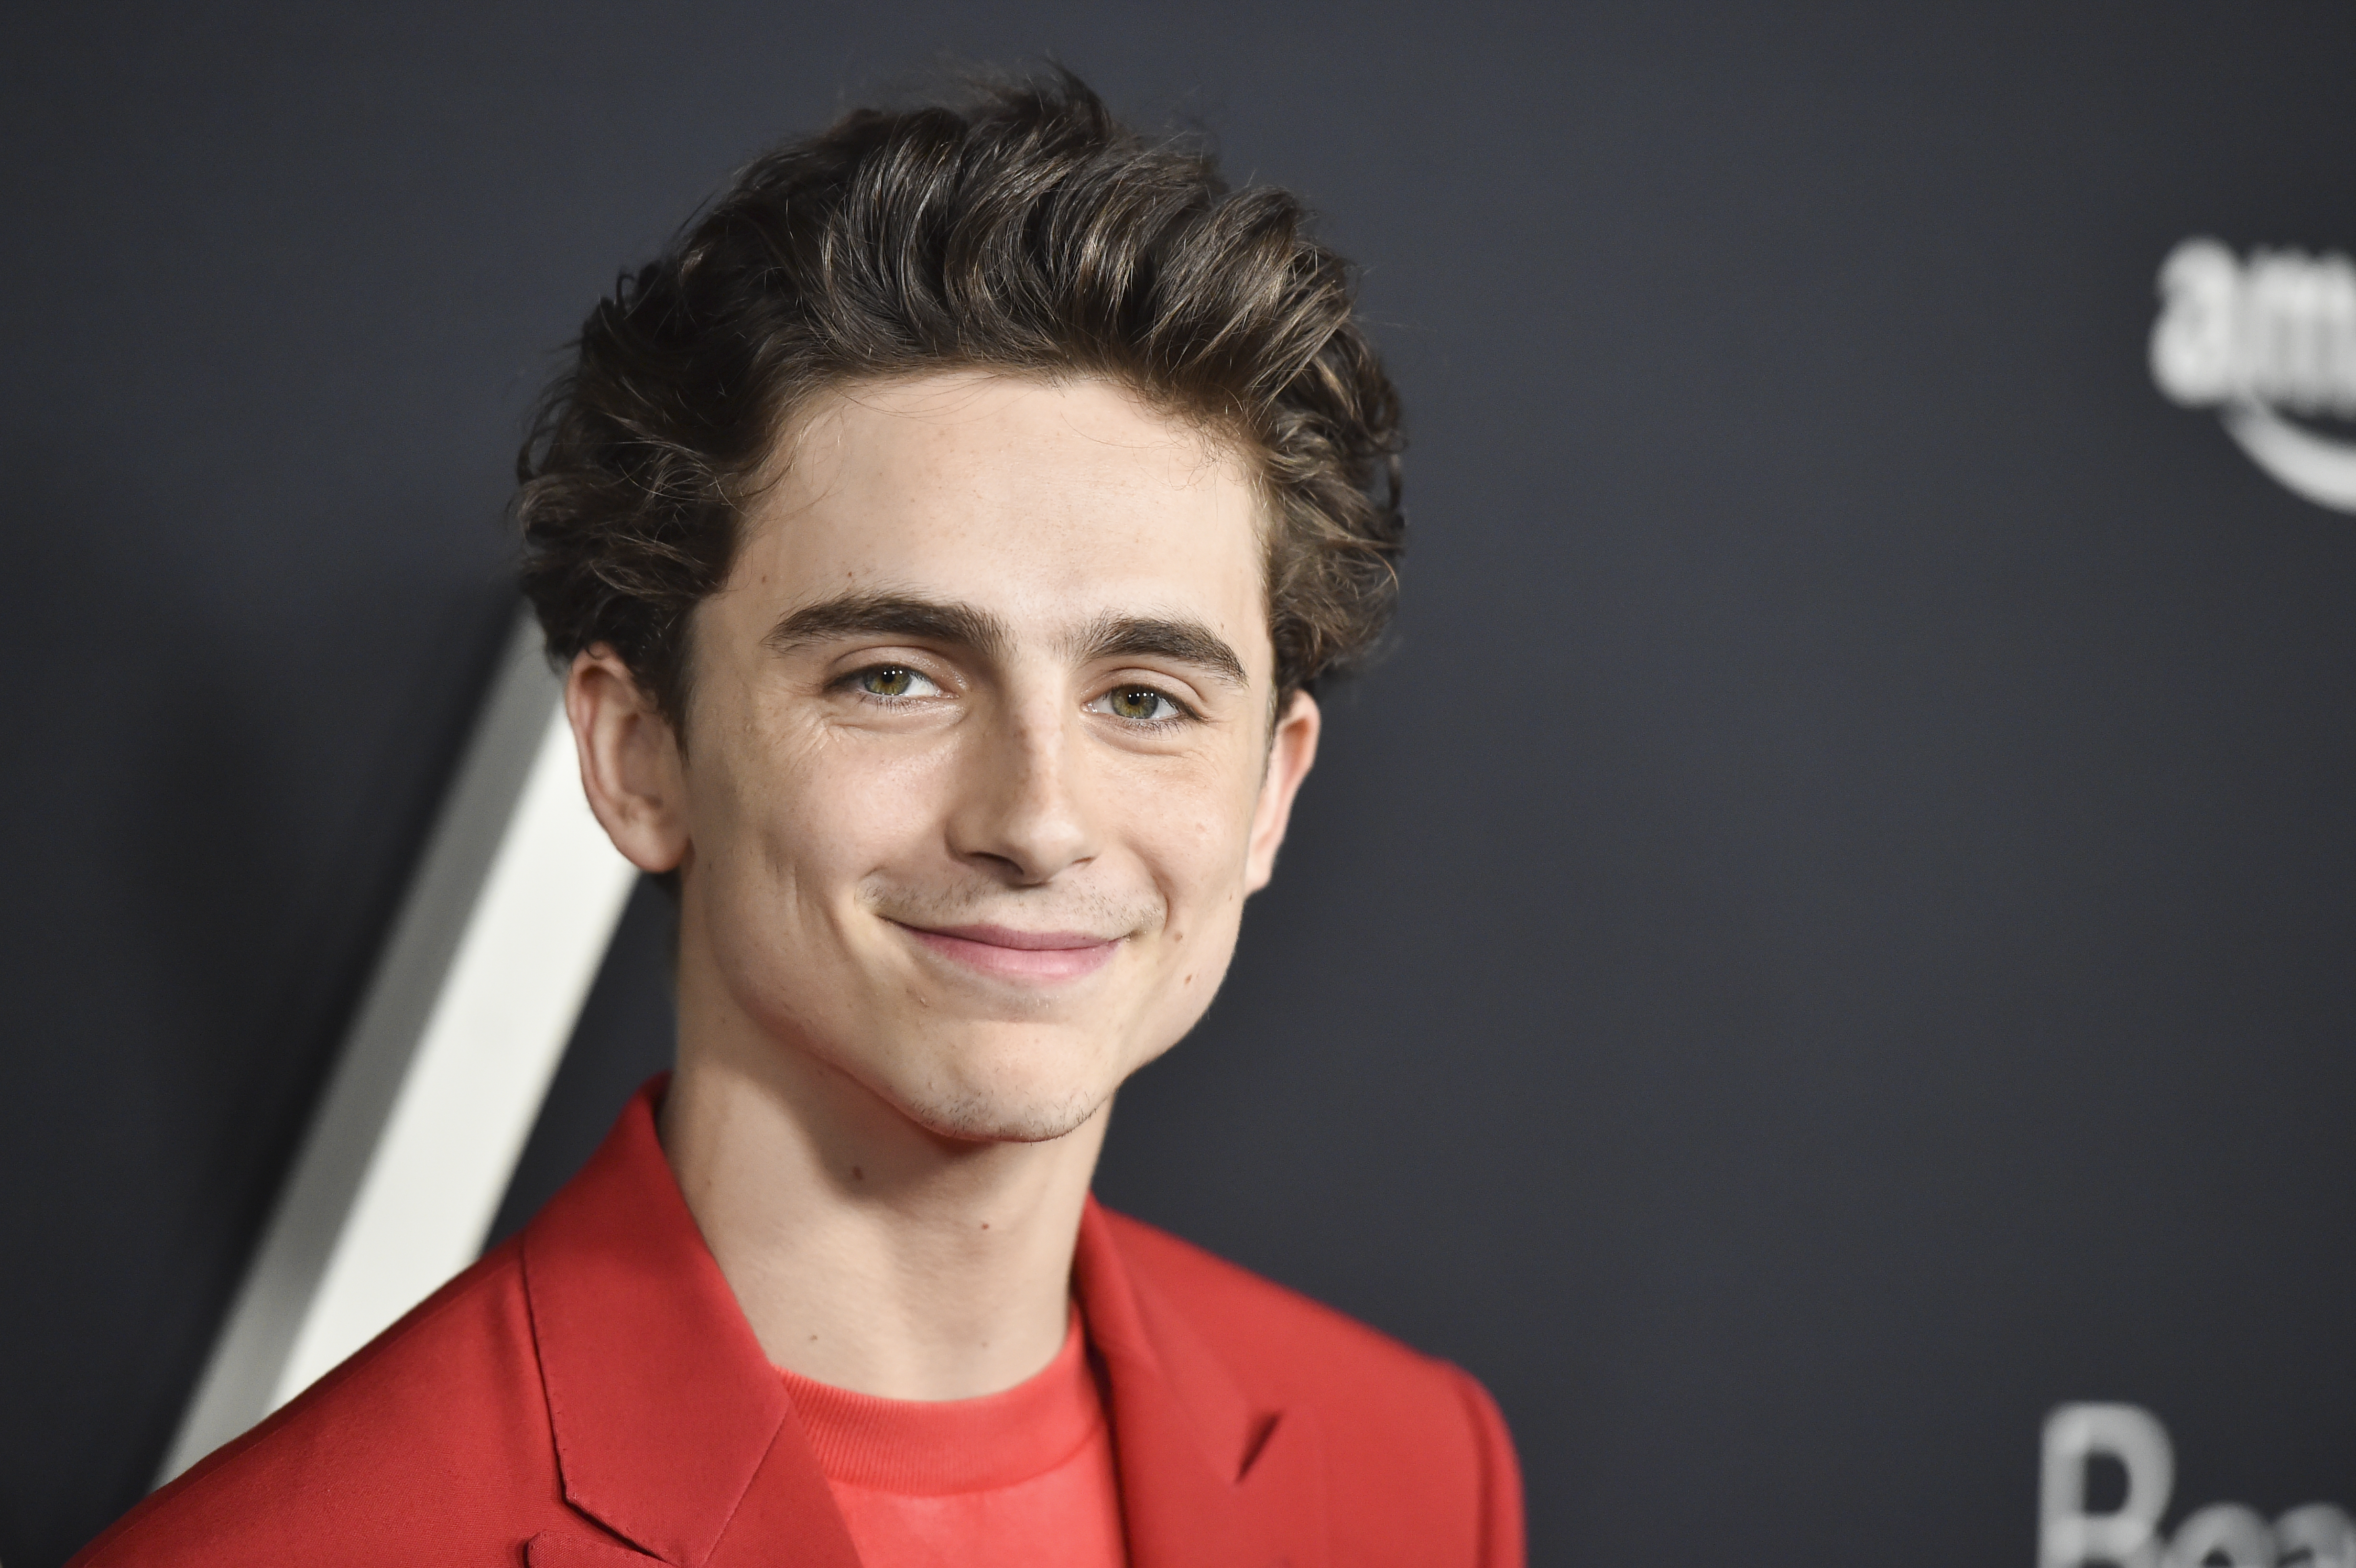 Timothée Chalamet at the "Beautiful Boy" premiere in, Los Angeles, on October 8, 2018. | Source: Getty Images